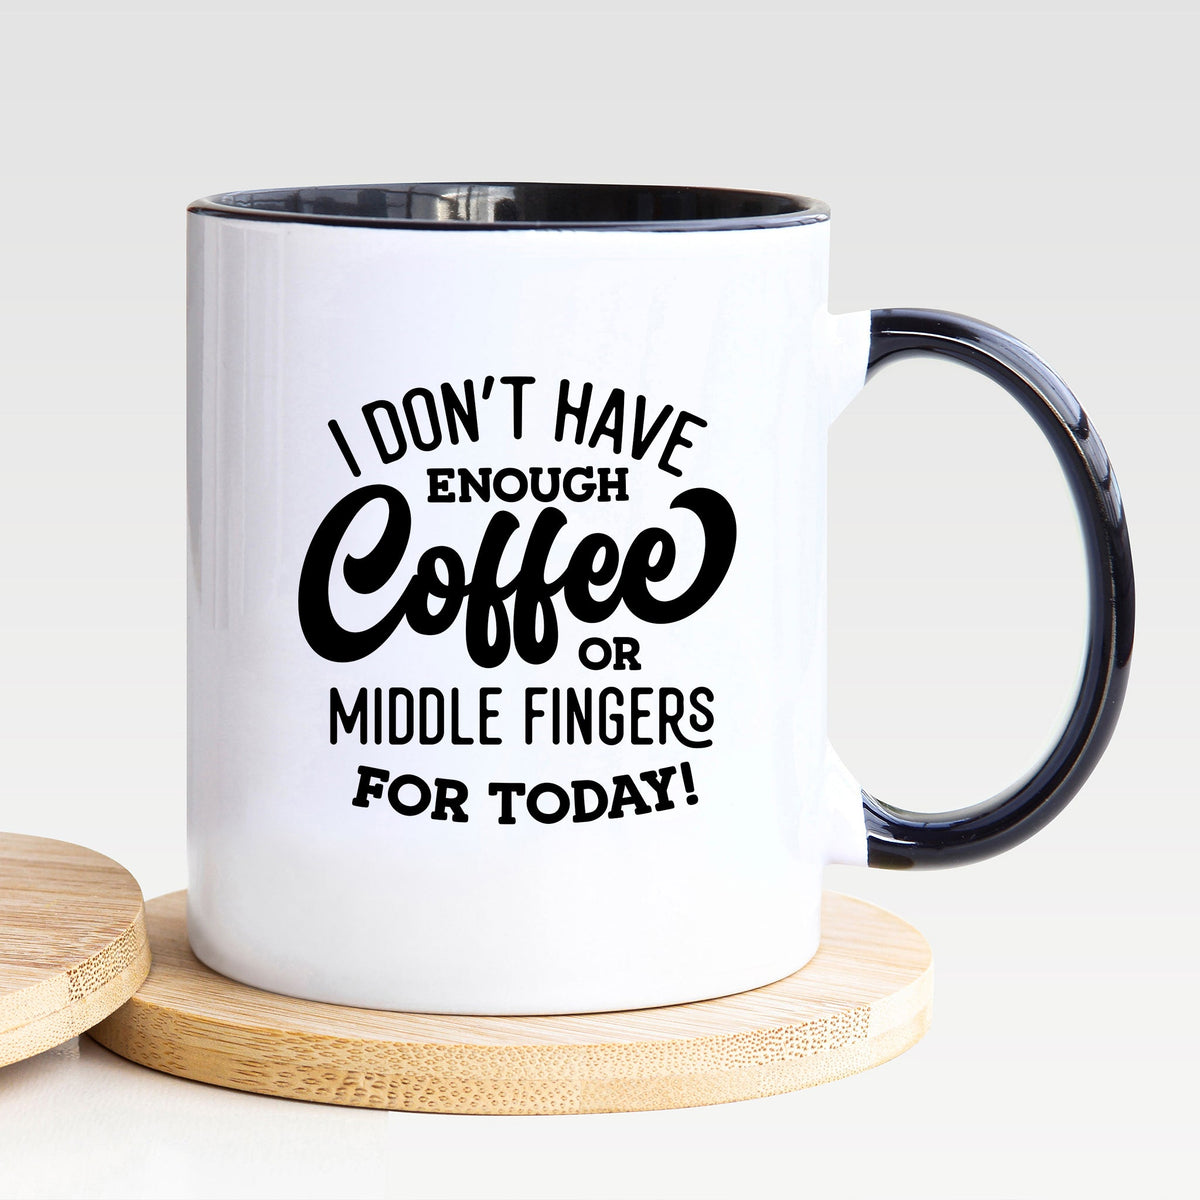 I Don't Have Enough Coffee Or Middle Fingers For Today - Mug